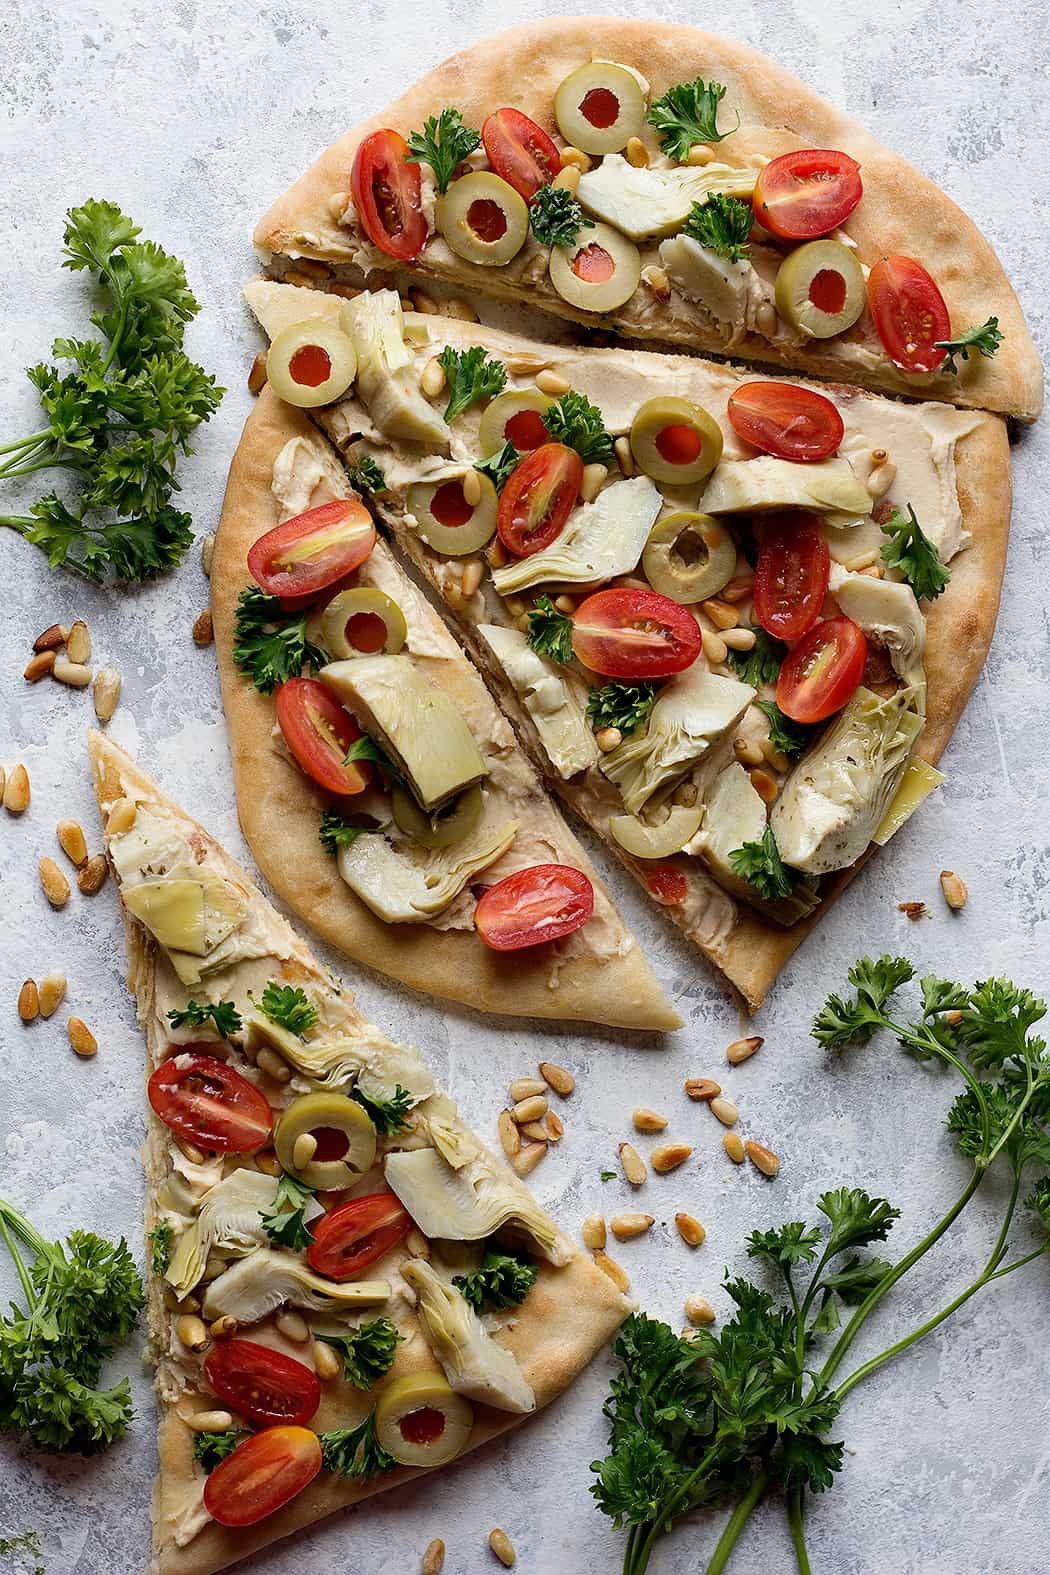 Slices of flatbread topped with hummus, artichoke, tomatoes and pine nuts. 